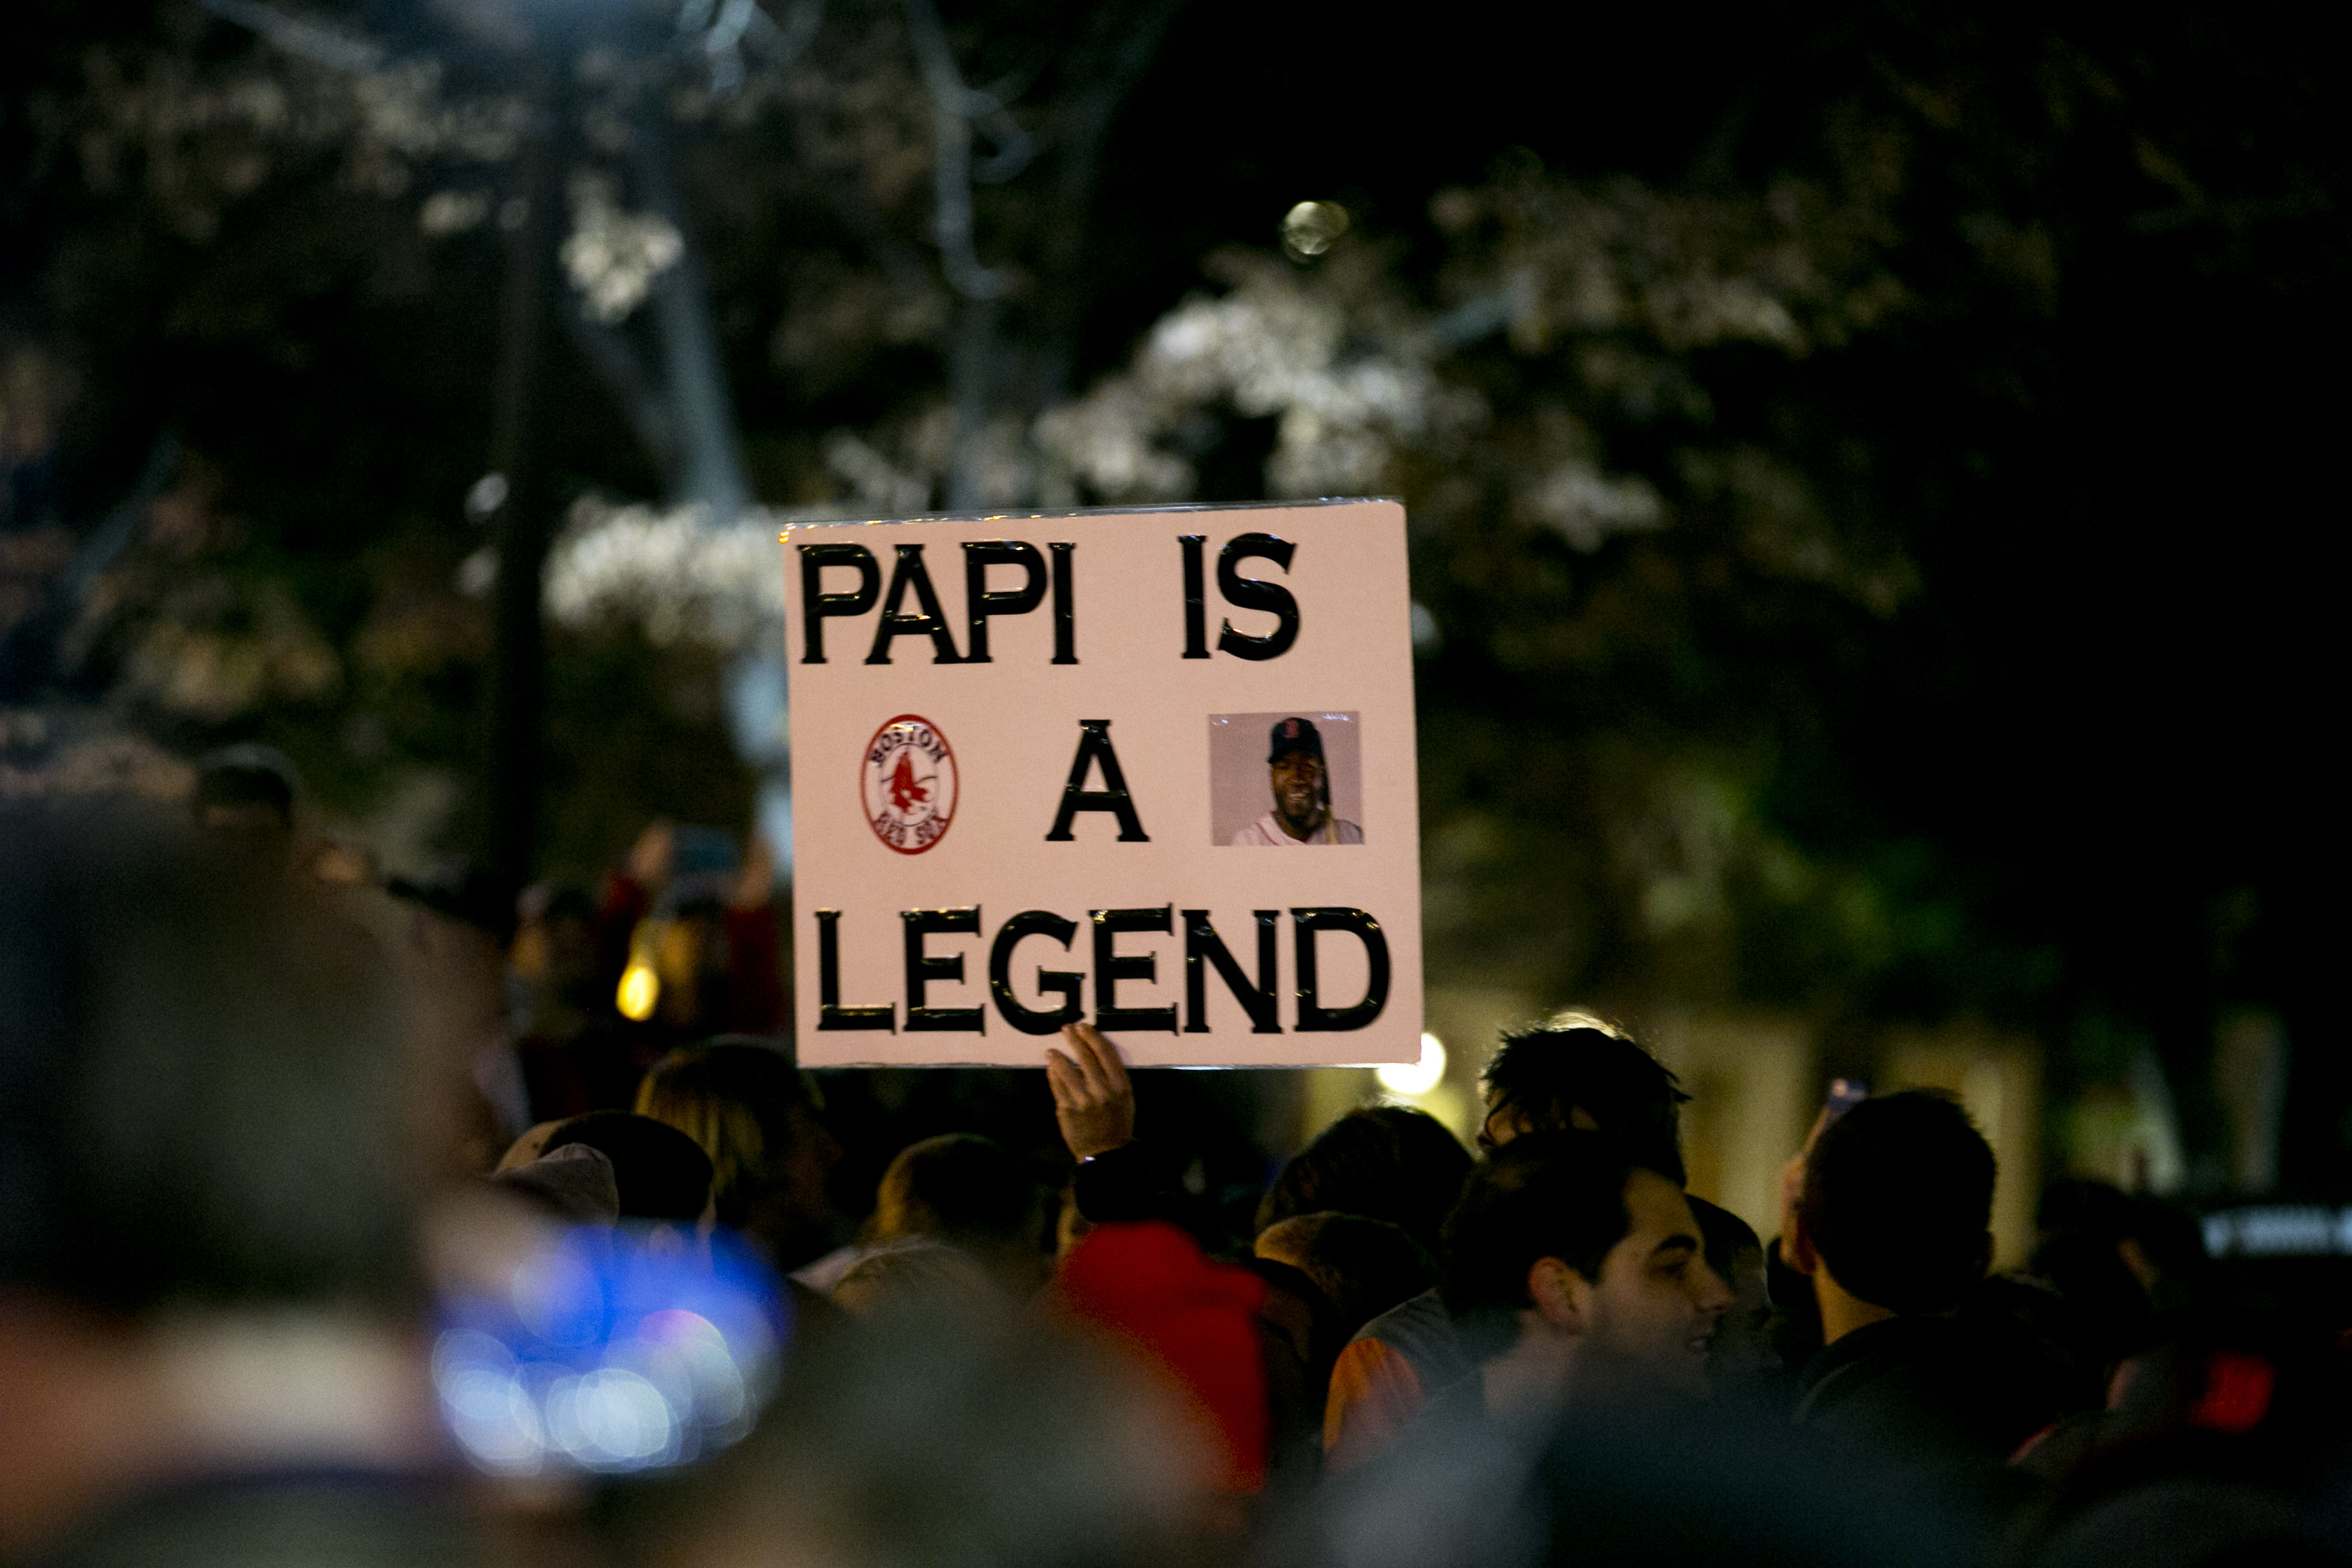 A fan brought a "Papi is a legend" sign to celebrate outside Fenway Park after the Red Sox won the World Series on Oct. 30.